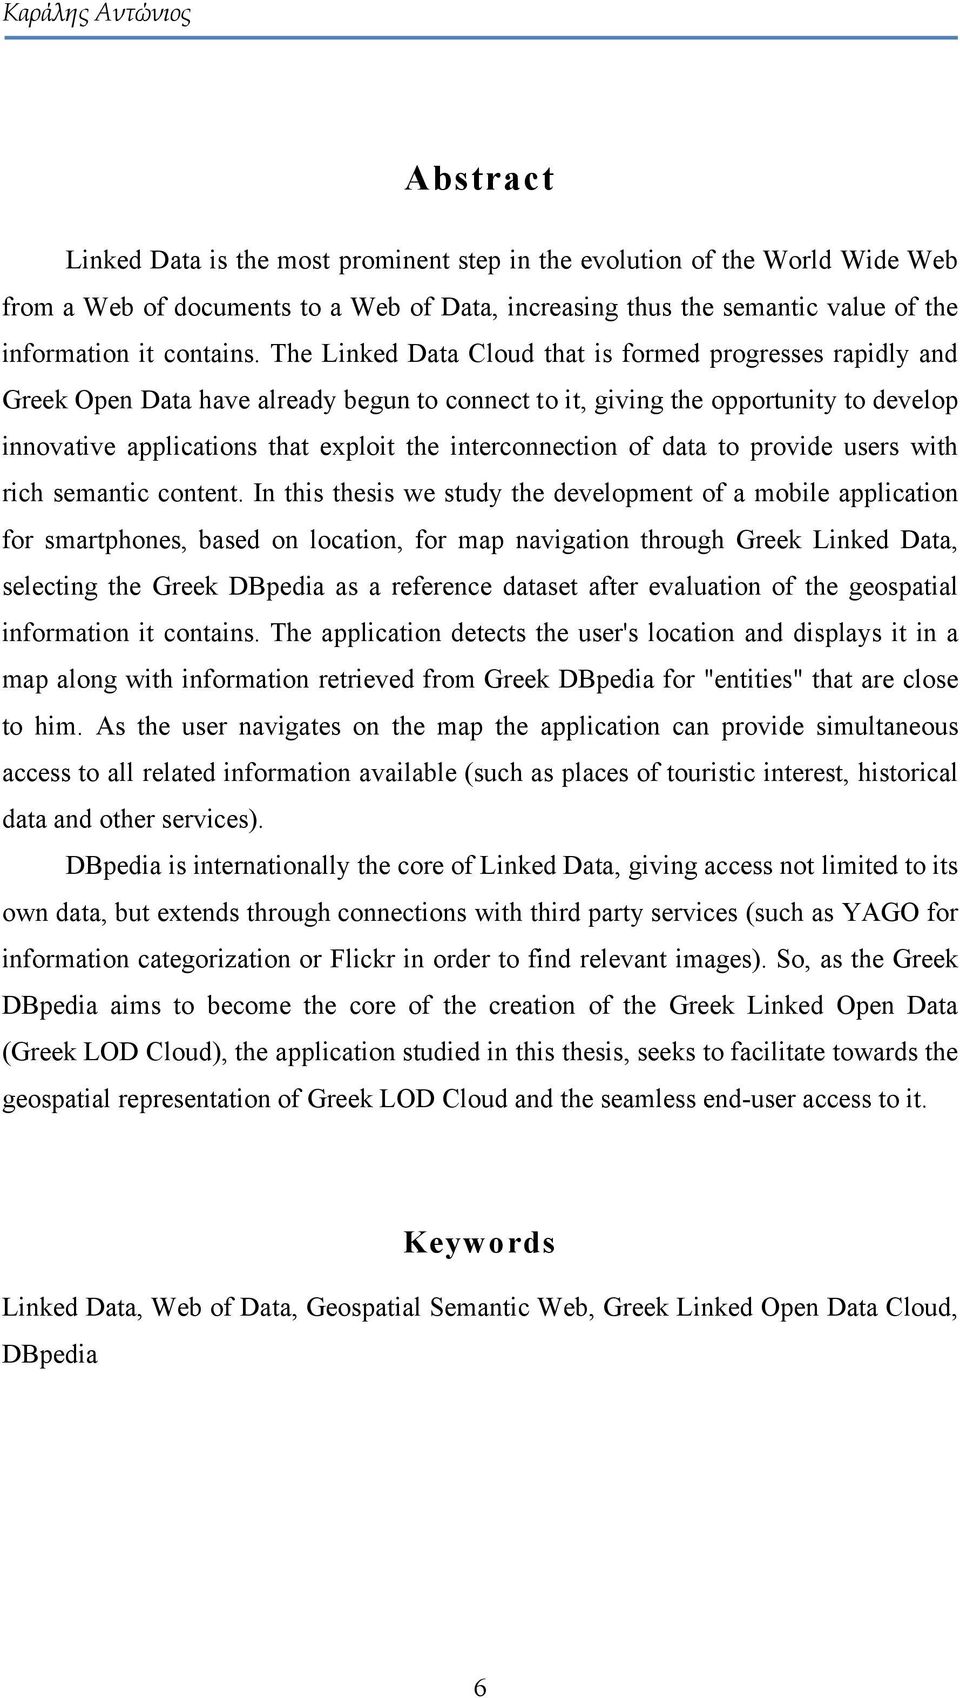 The Linked Data Cloud that is formed progresses rapidly and Greek Open Data have already begun to connect to it, giving the opportunity to develop innovative applications that exploit the